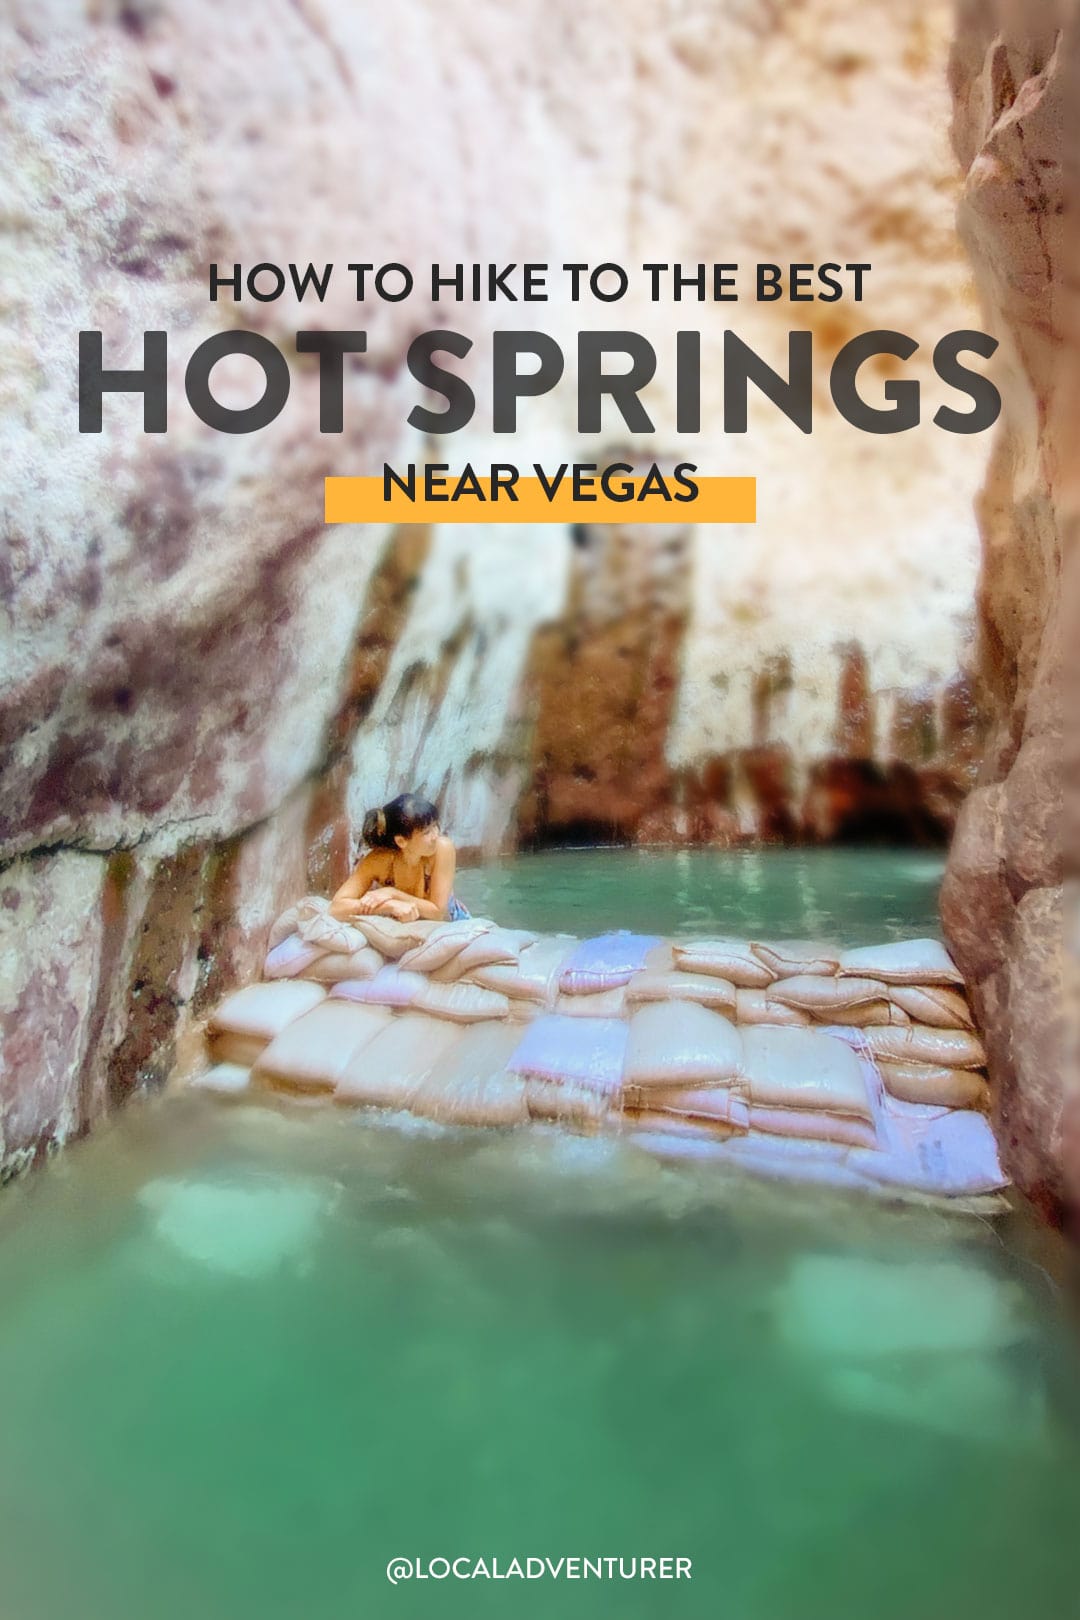 az hot springs hike - how to hike to the best hot springs near las vegas